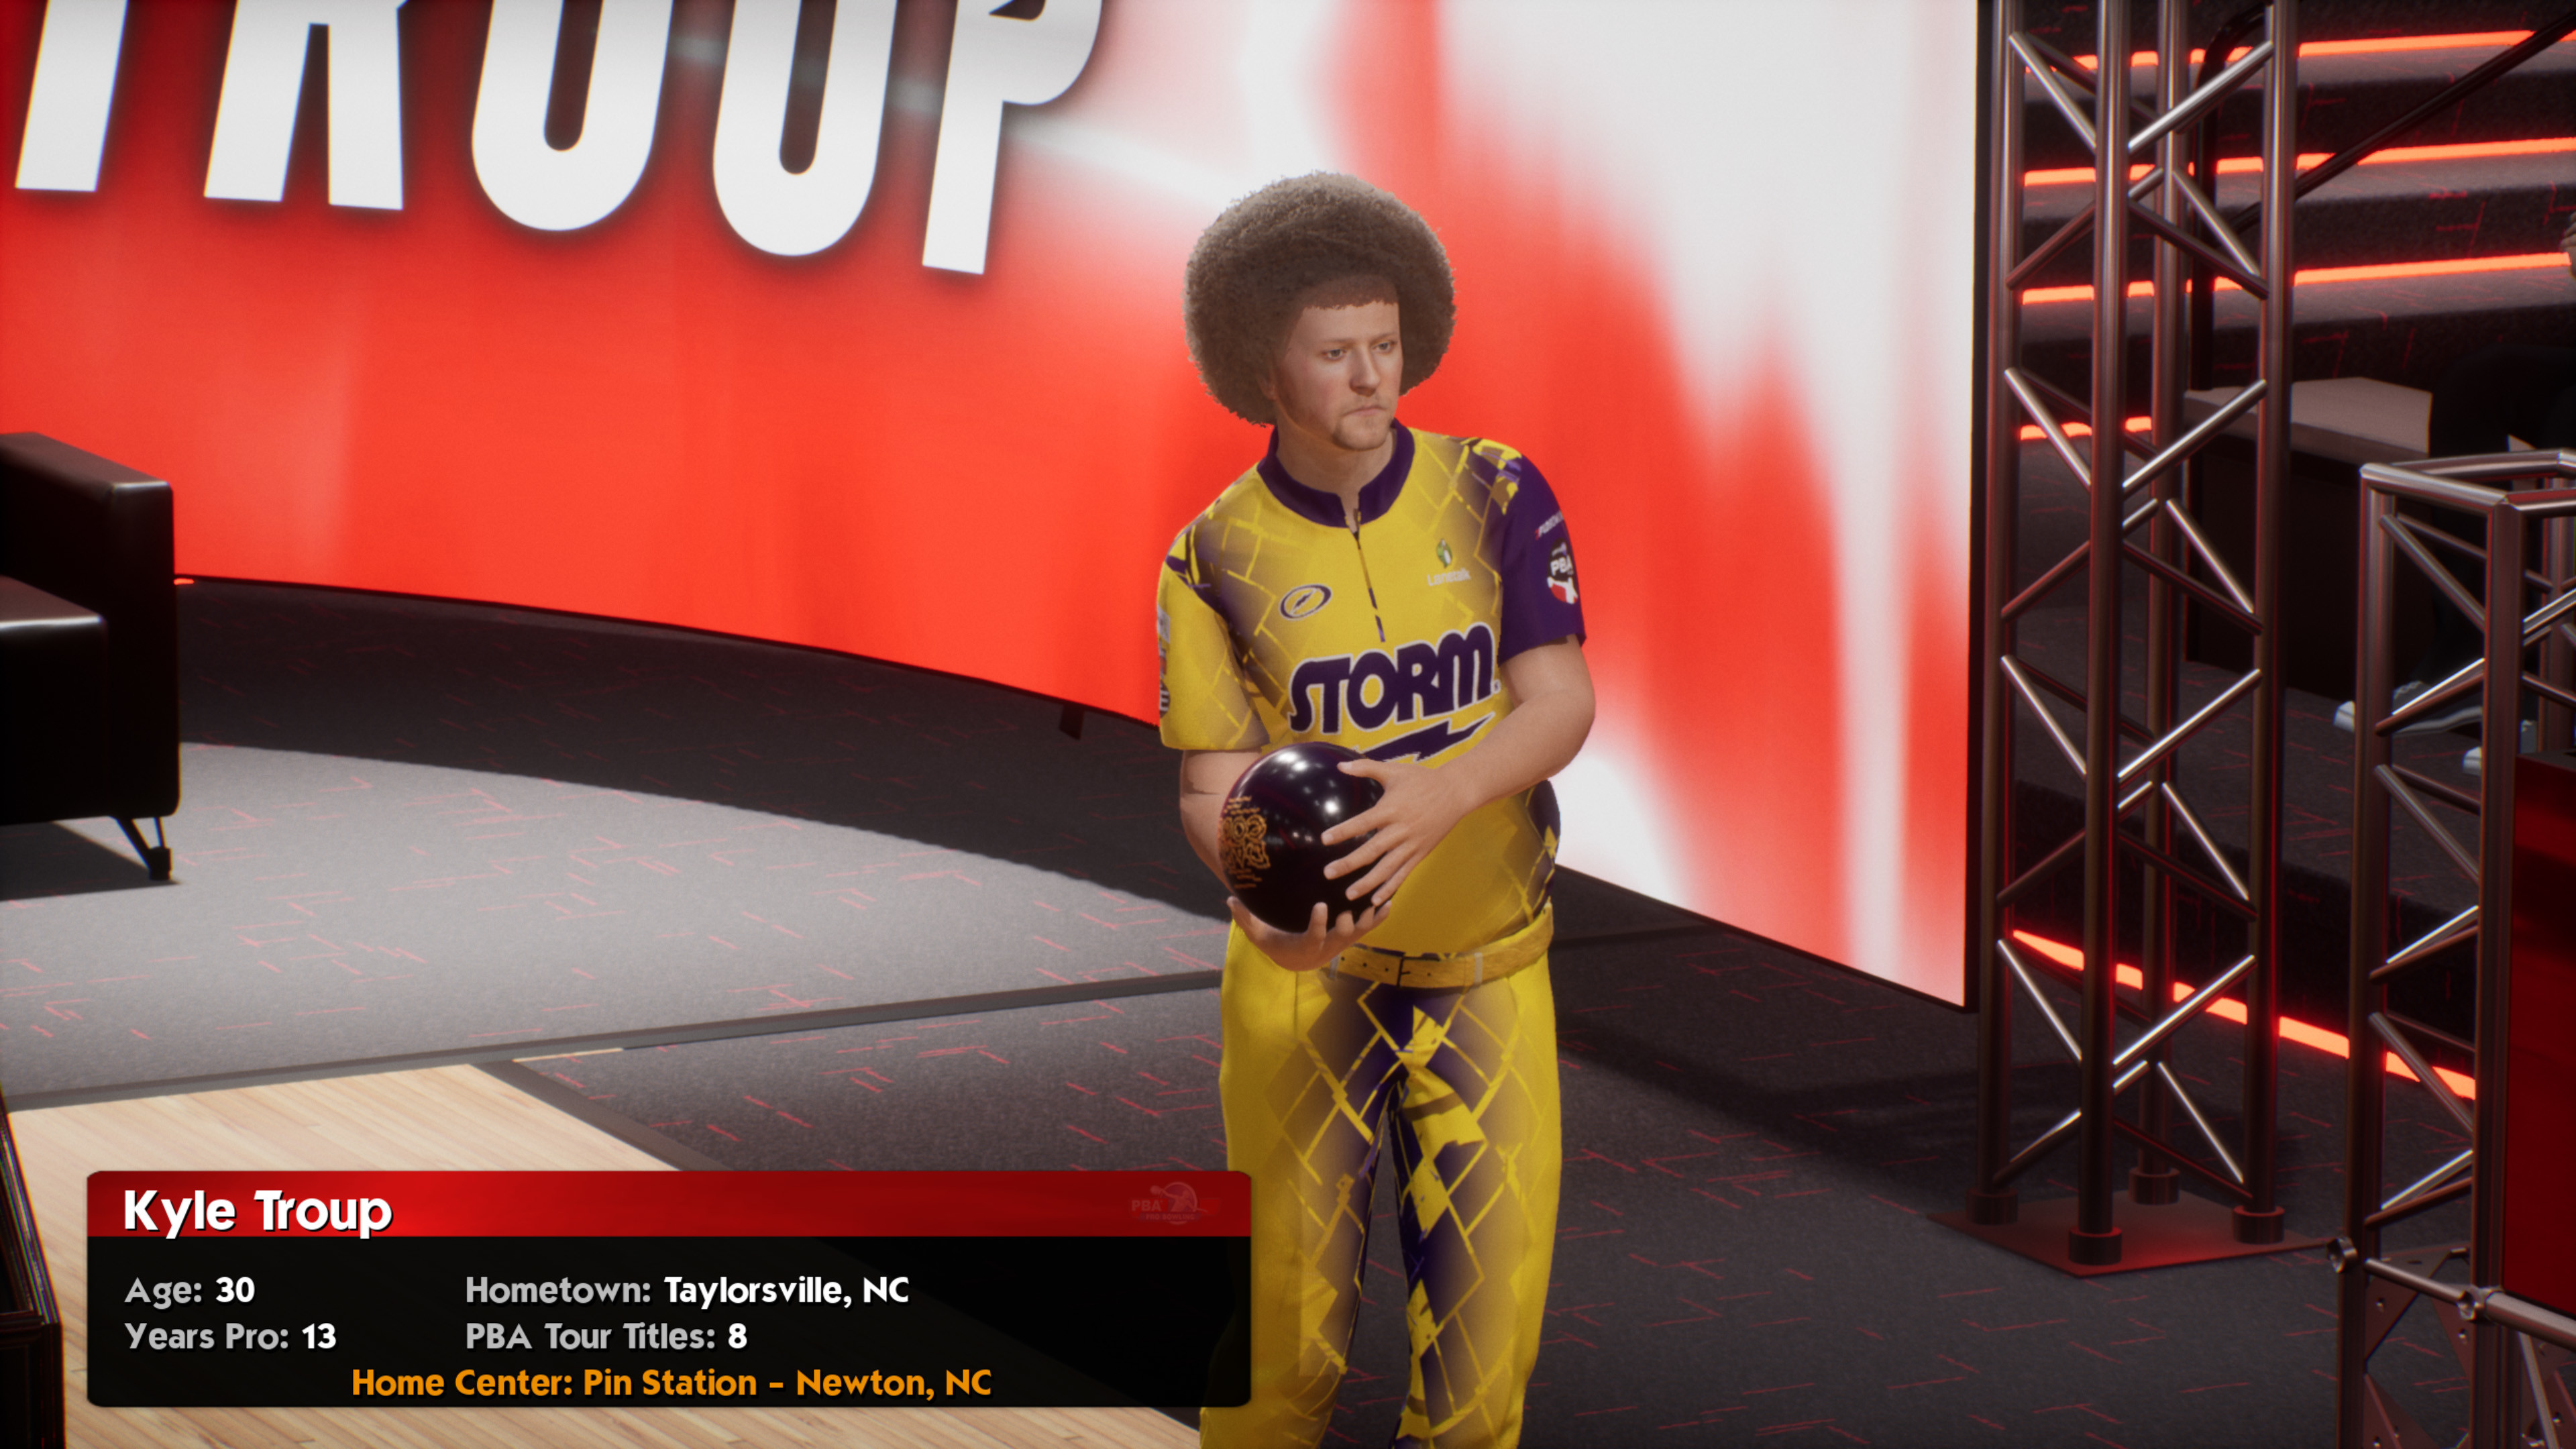 PBA Pro Bowling 2023 Free Download for PC